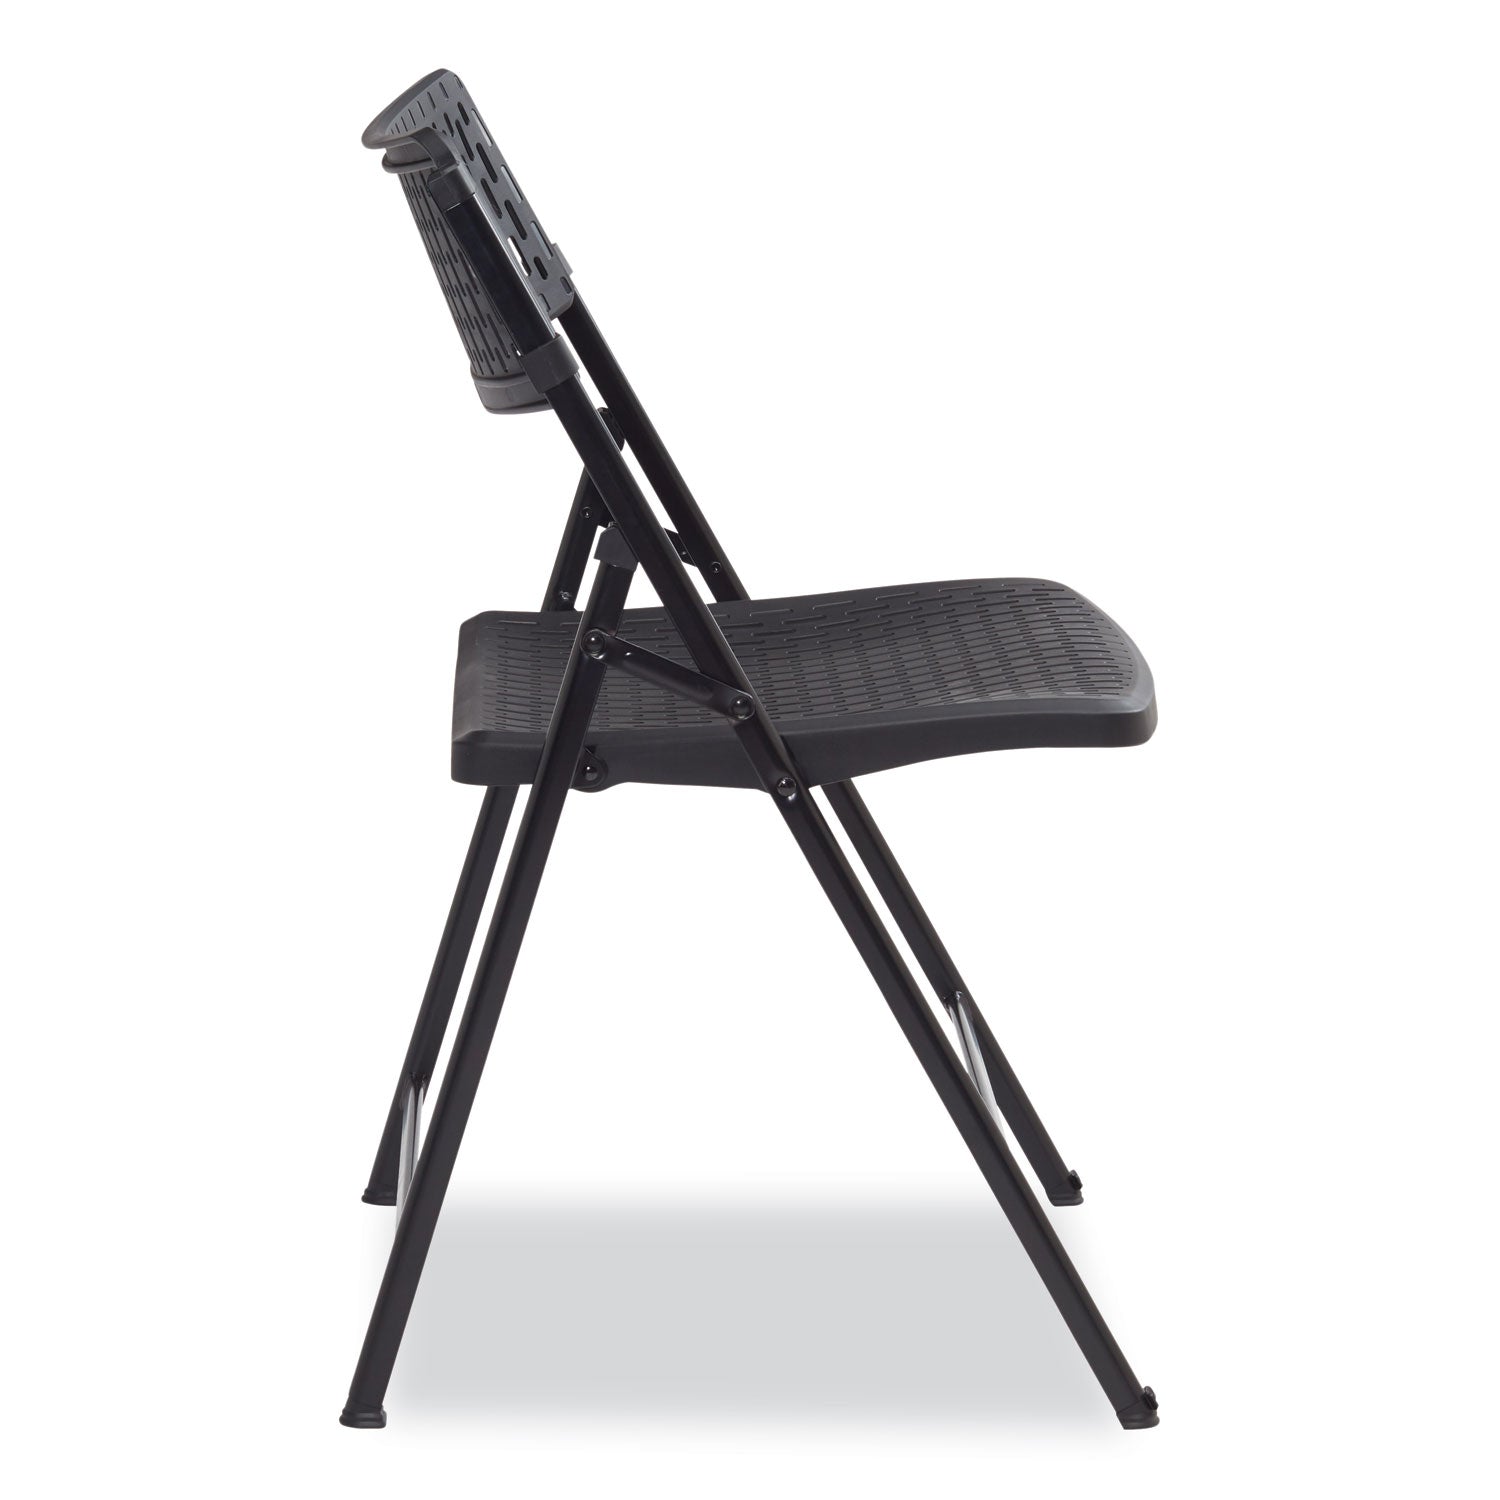 airflex-series-premium-poly-folding-chair-supports-1000-lb-1725-seat-ht-black-seat-back-base-4-ctships-in-1-3-bus-days_nps1410 - 4